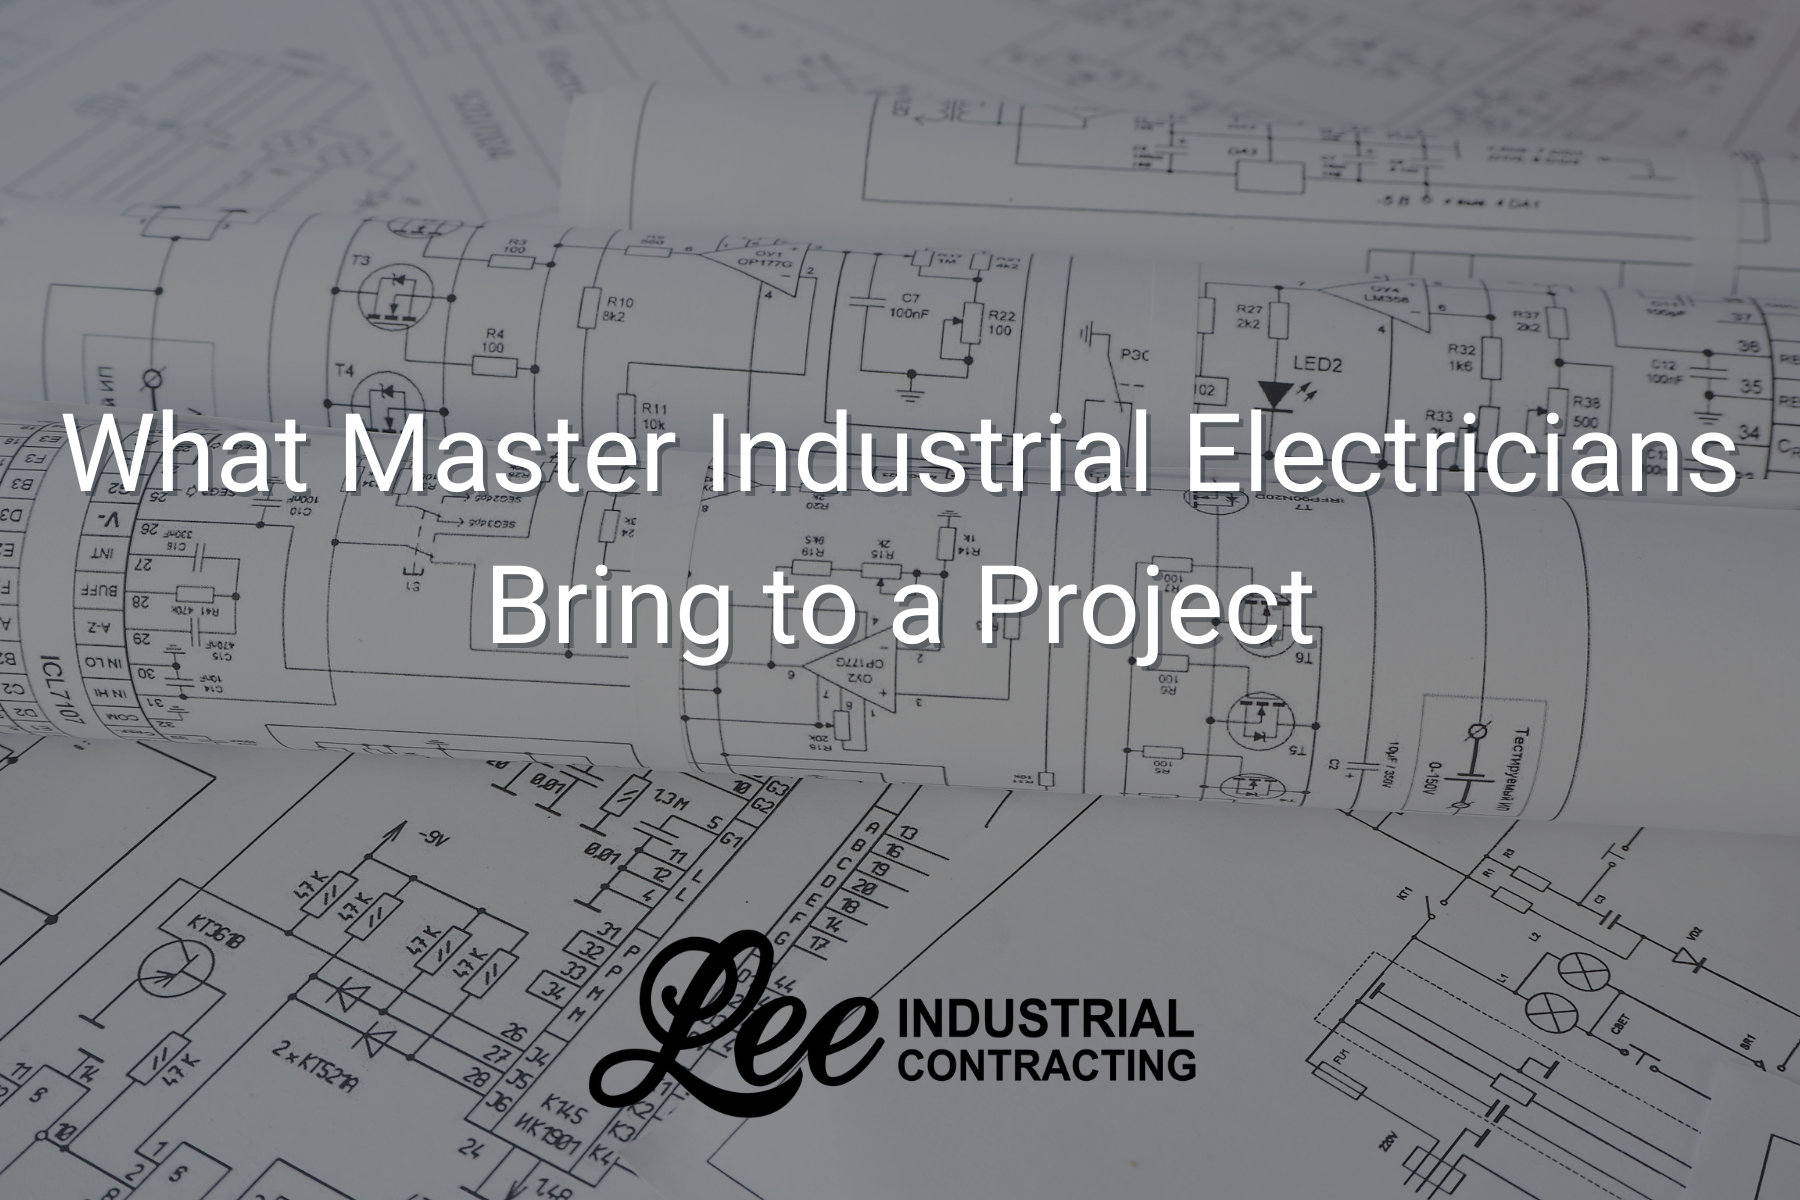 Going beyond just installing and connecting wires and plugs, the master electrician brings a lot more to your project.